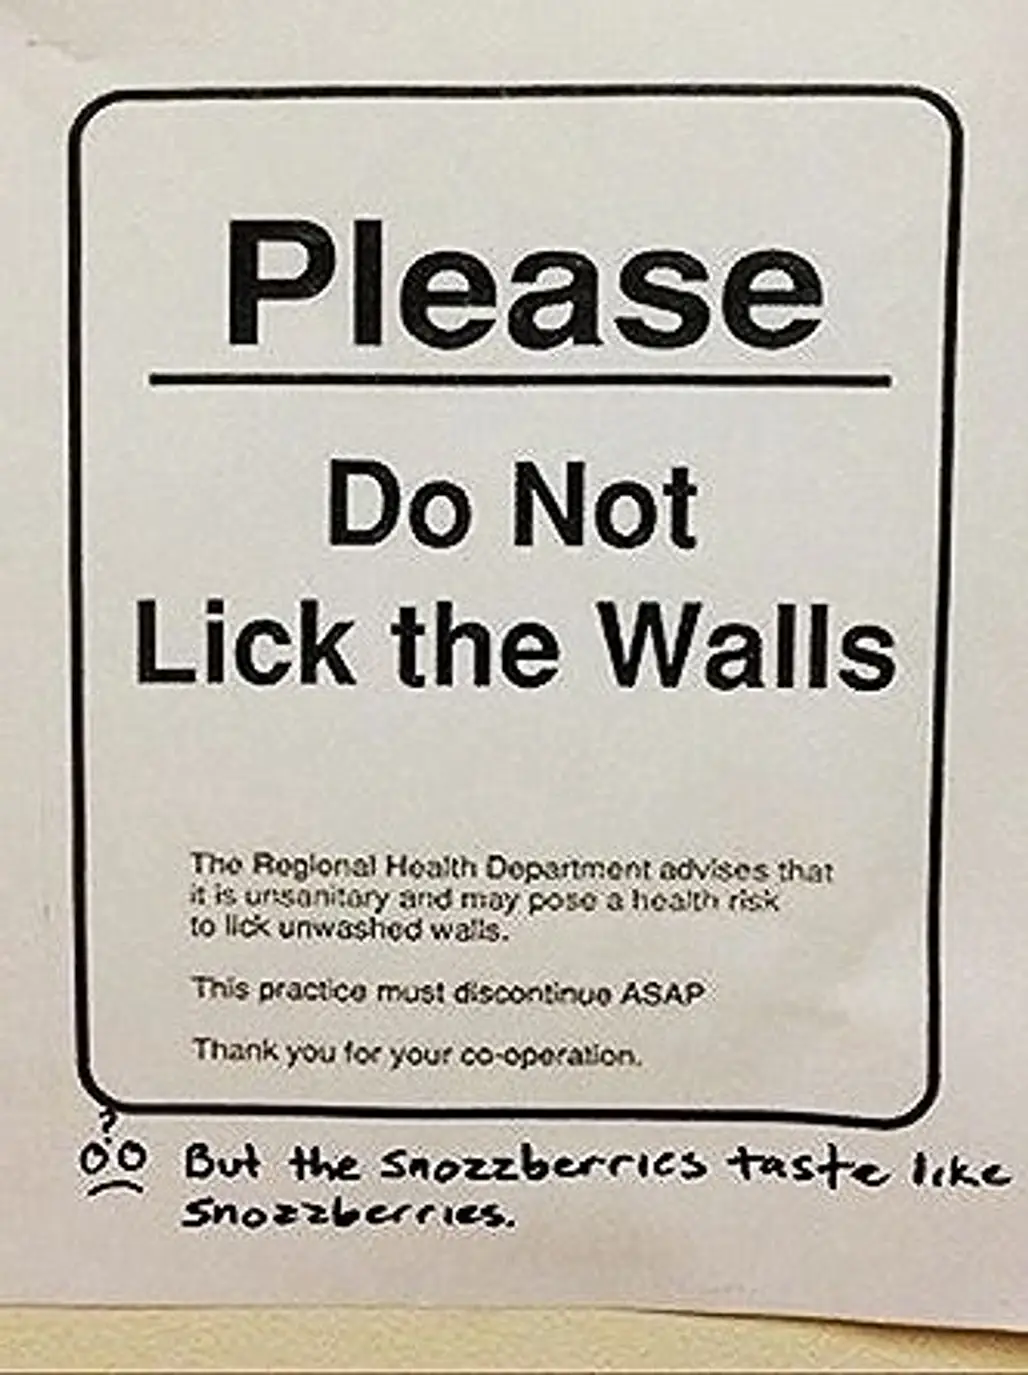 A Friendly Reminder from the Local Health Department...